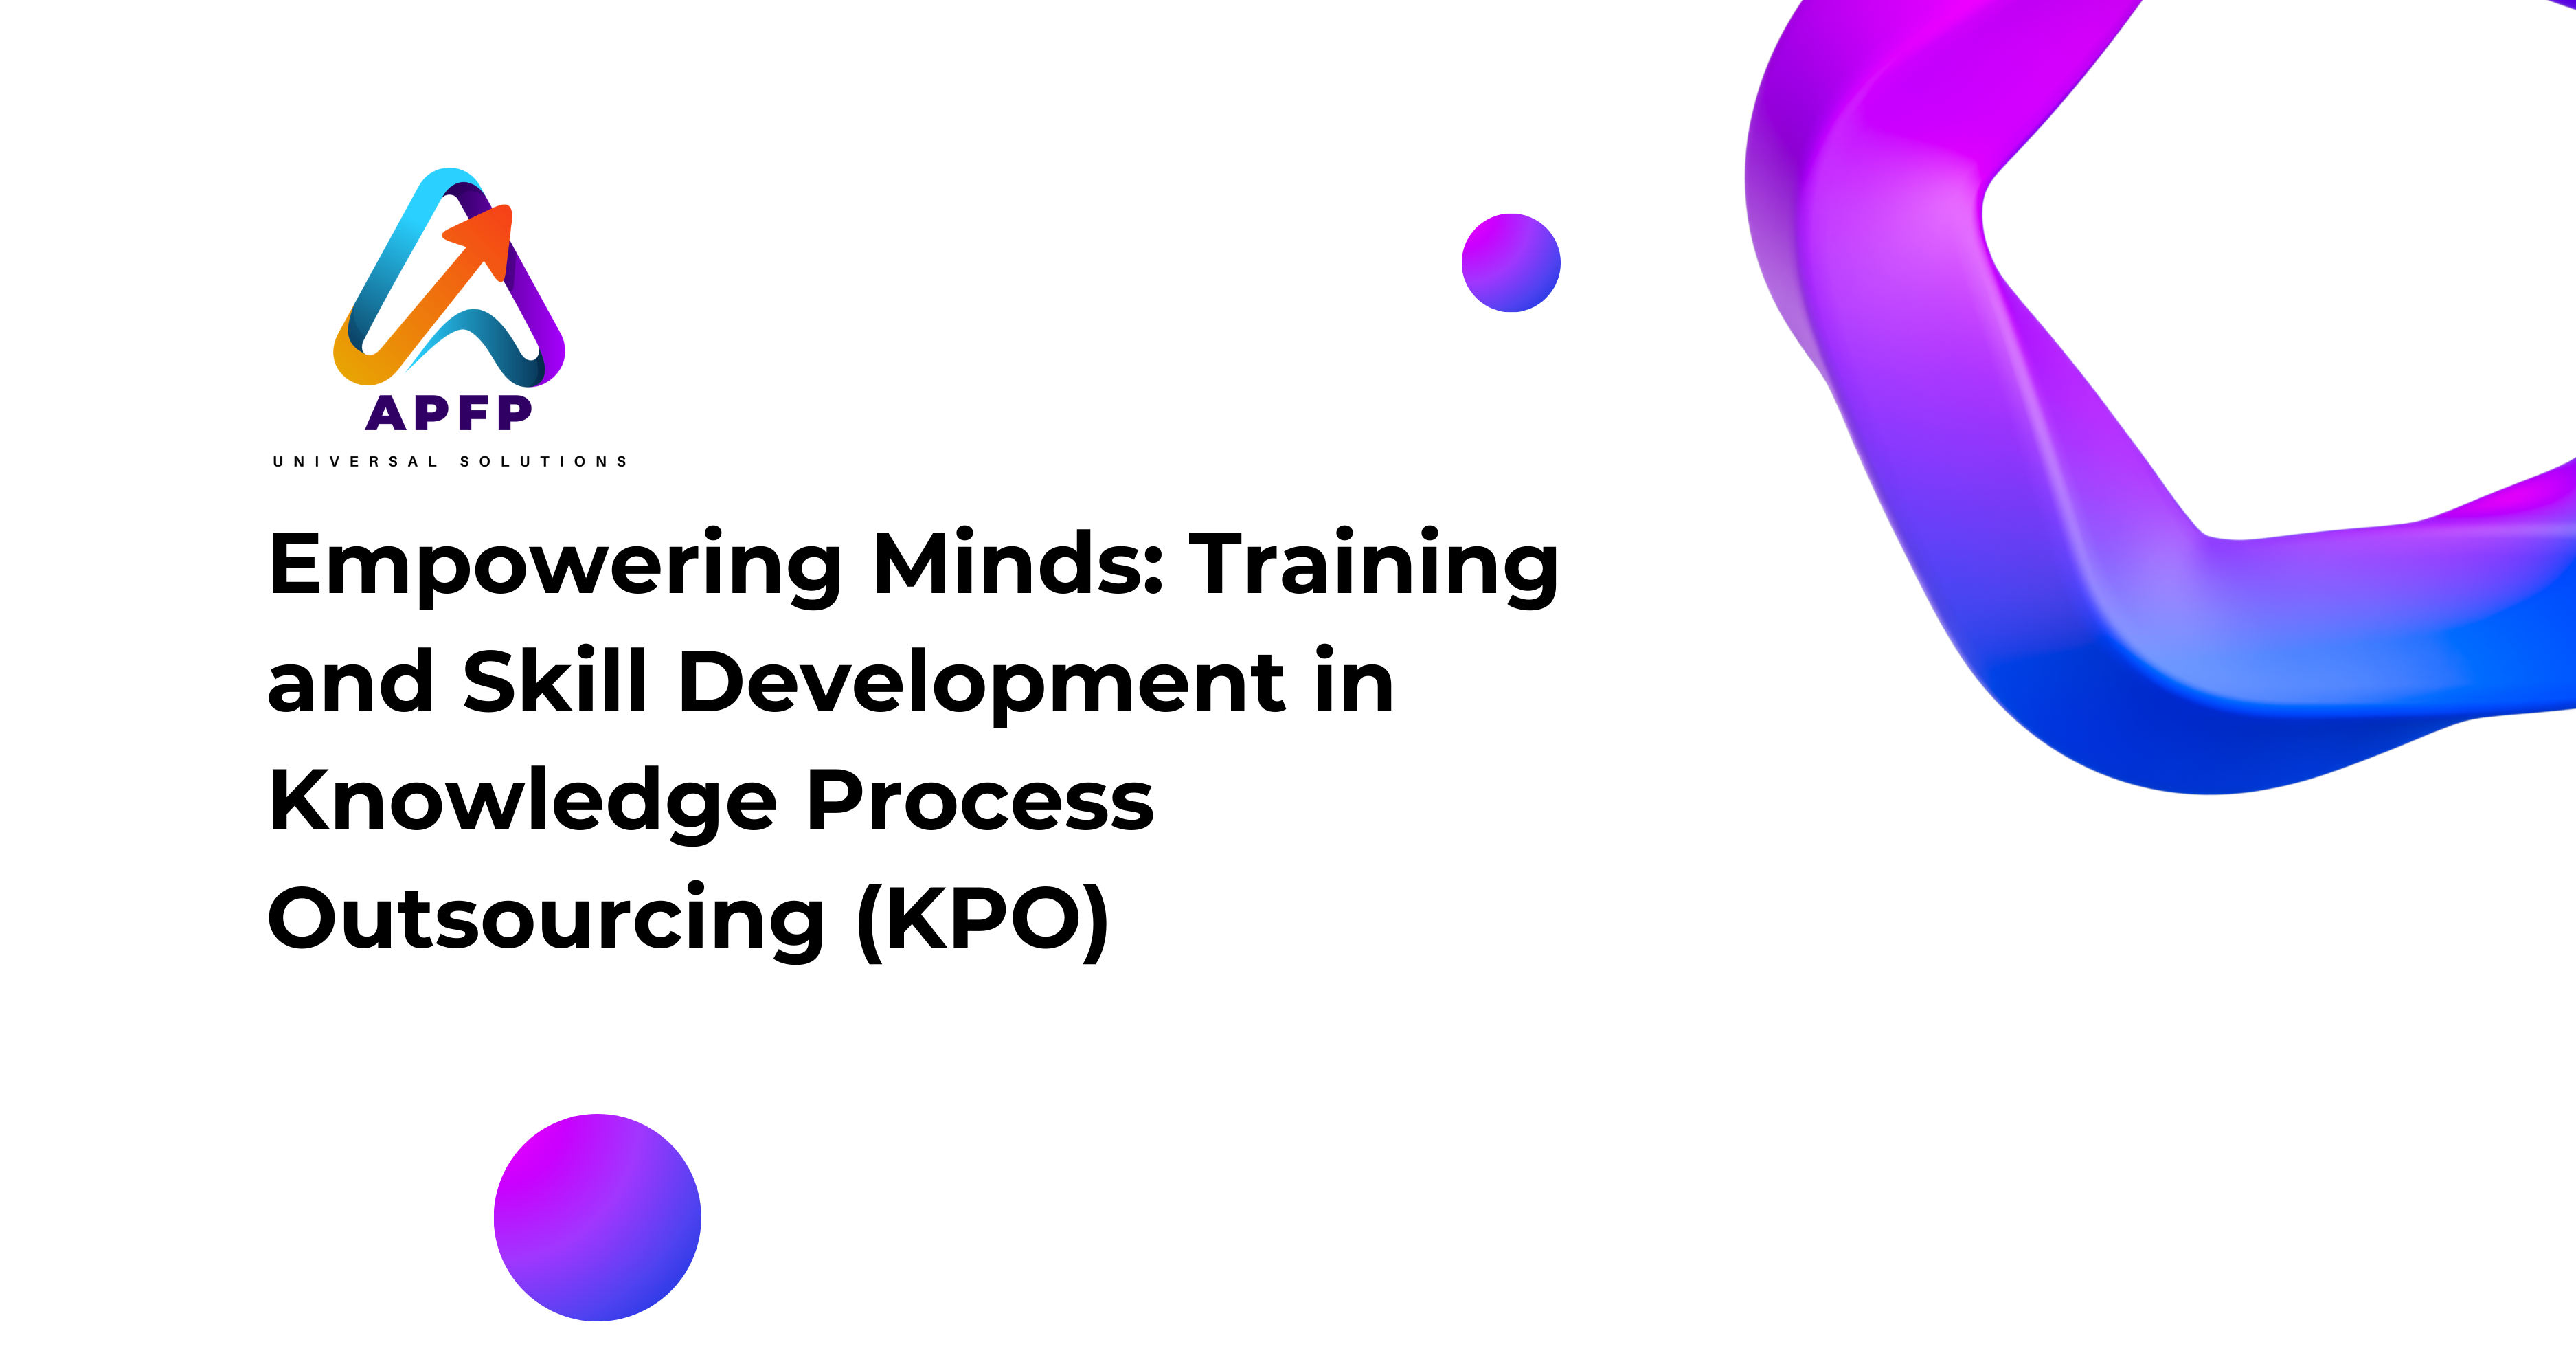 Empowering Minds: Training and Skill Development in Knowledge Process Outsourcing (KPO)